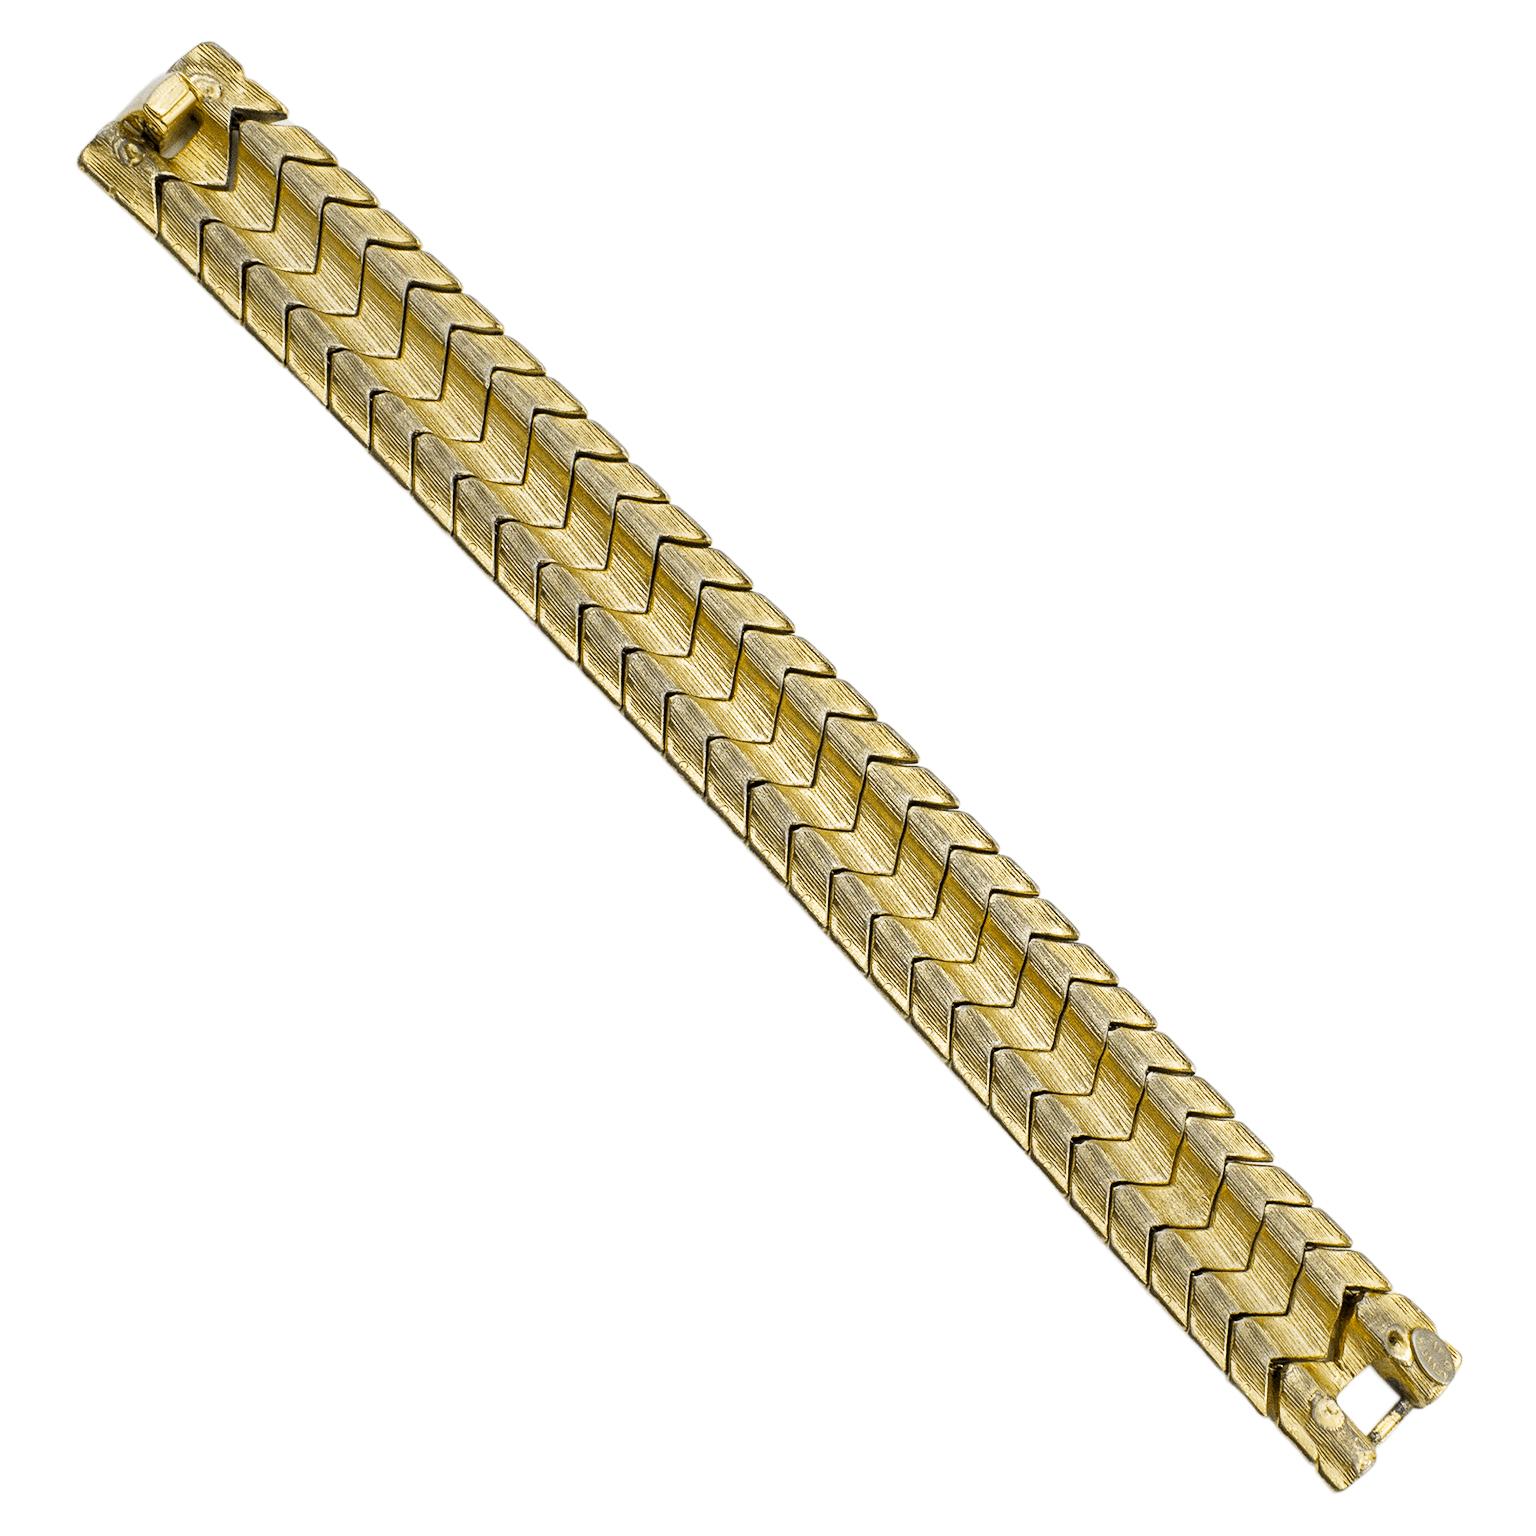 1980s Kenneth Jay Lane statement bracelet. Gold tone metal chevron that is ribbed and put together to look like a woven pattern. 0.75